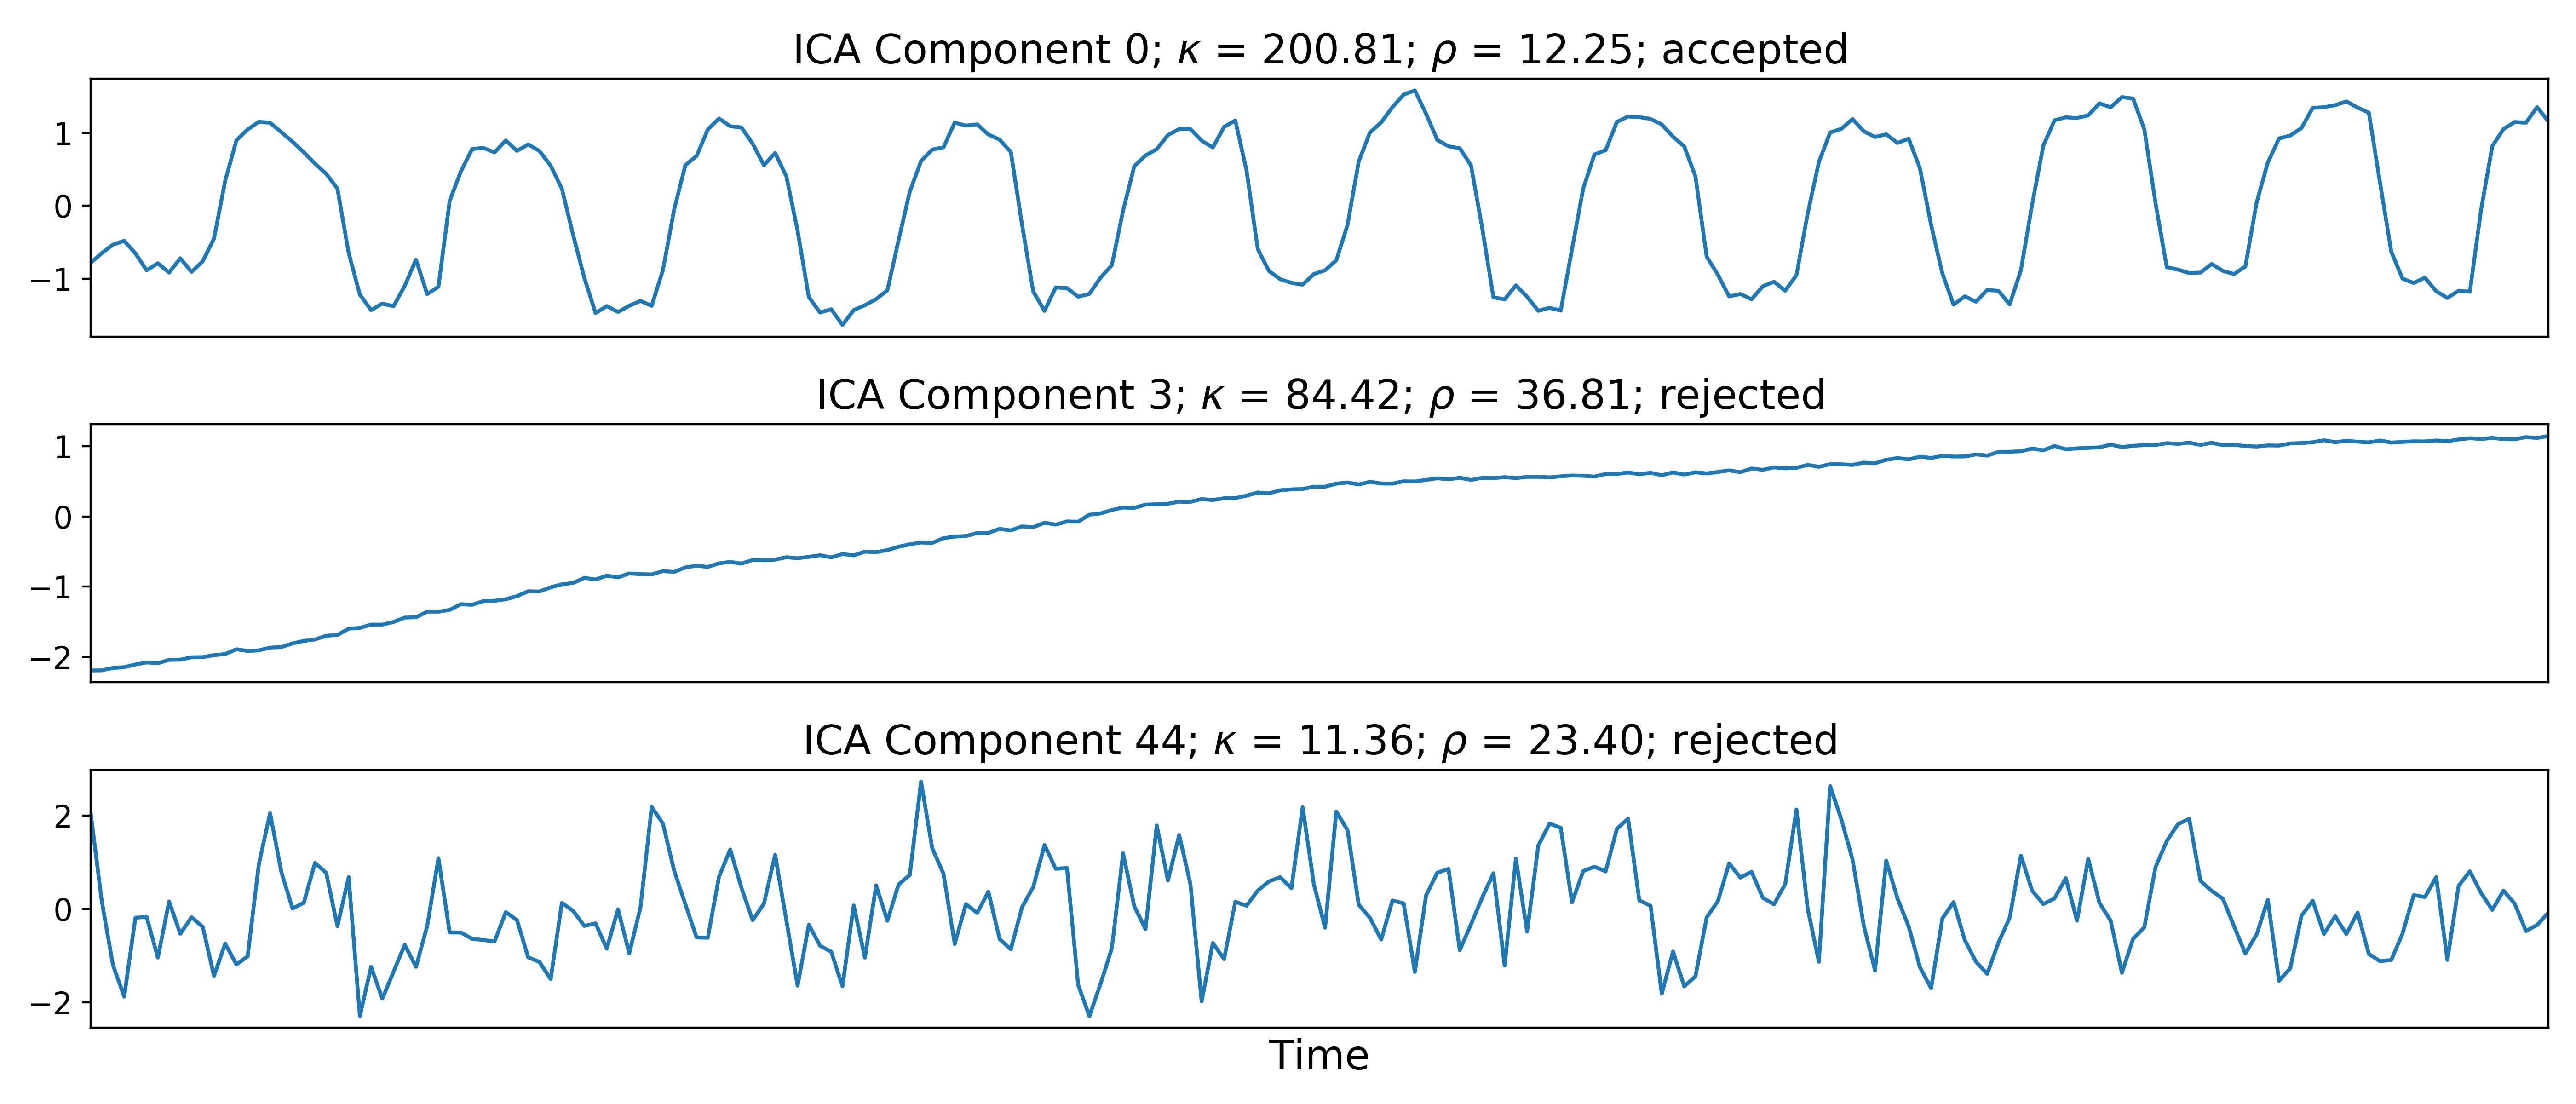 _images/a13_ica_component_timeseries.png